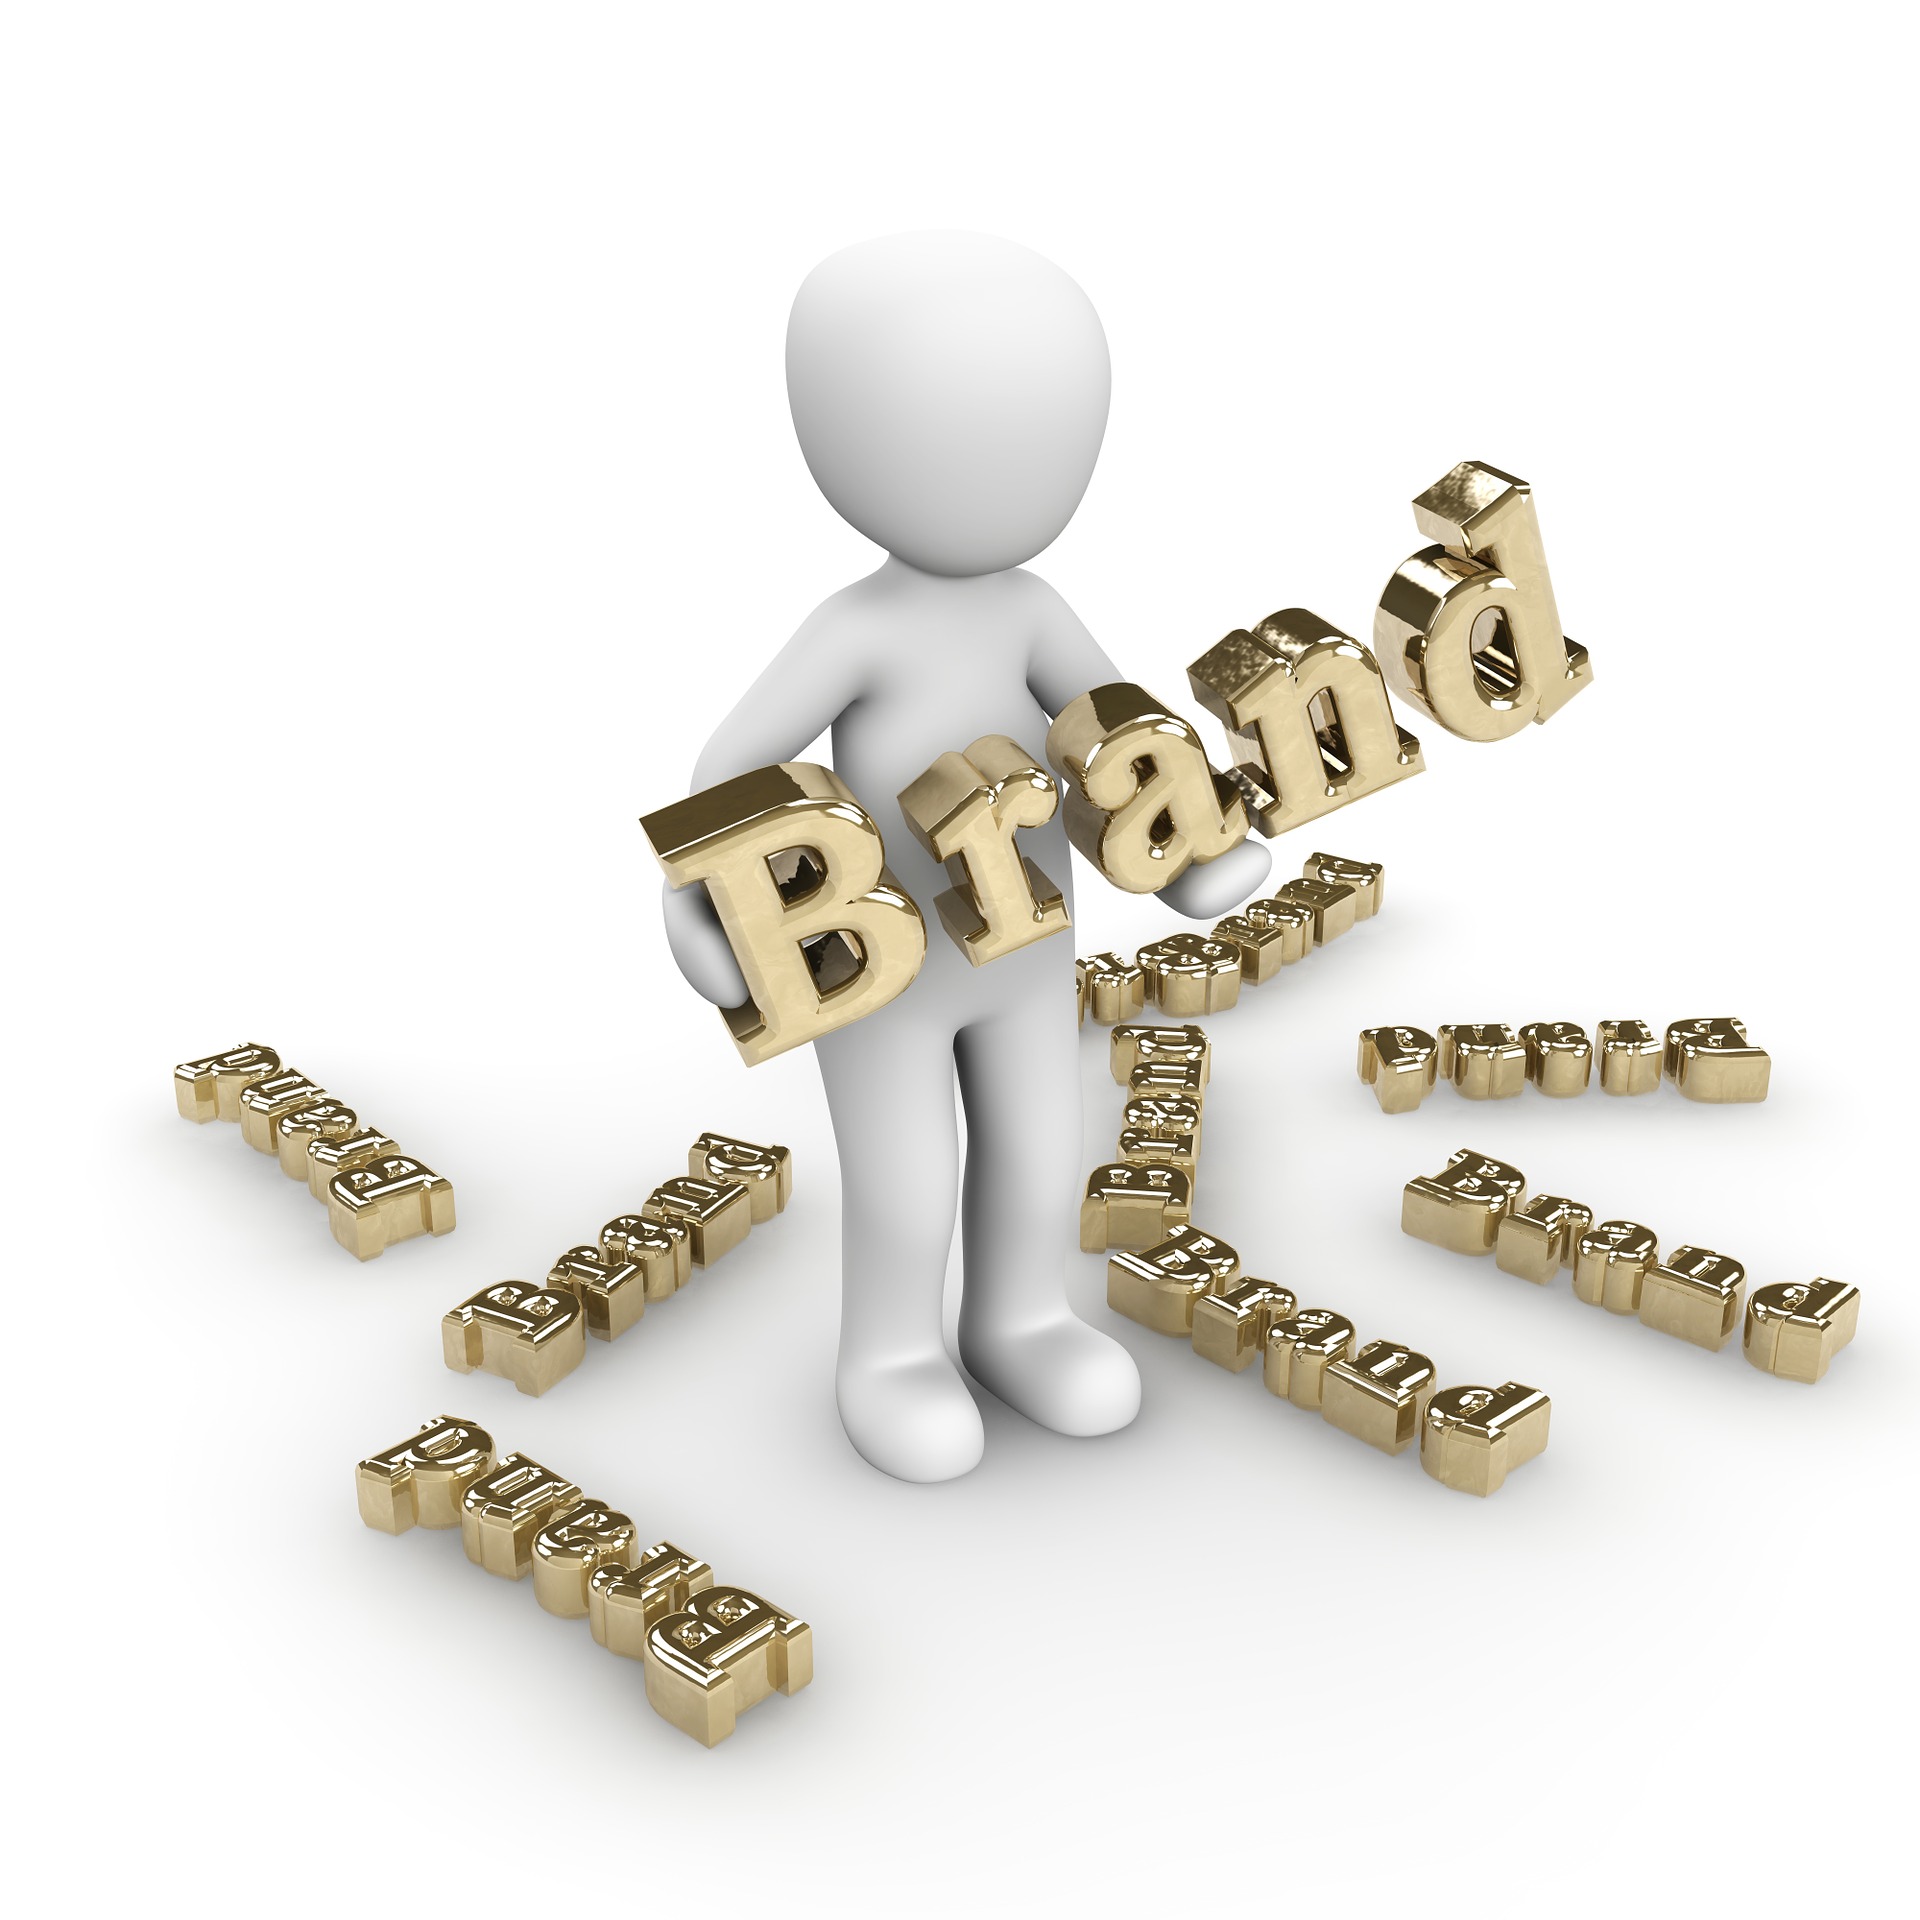 collaborate-with-brands-how-to-increase-youtube-views